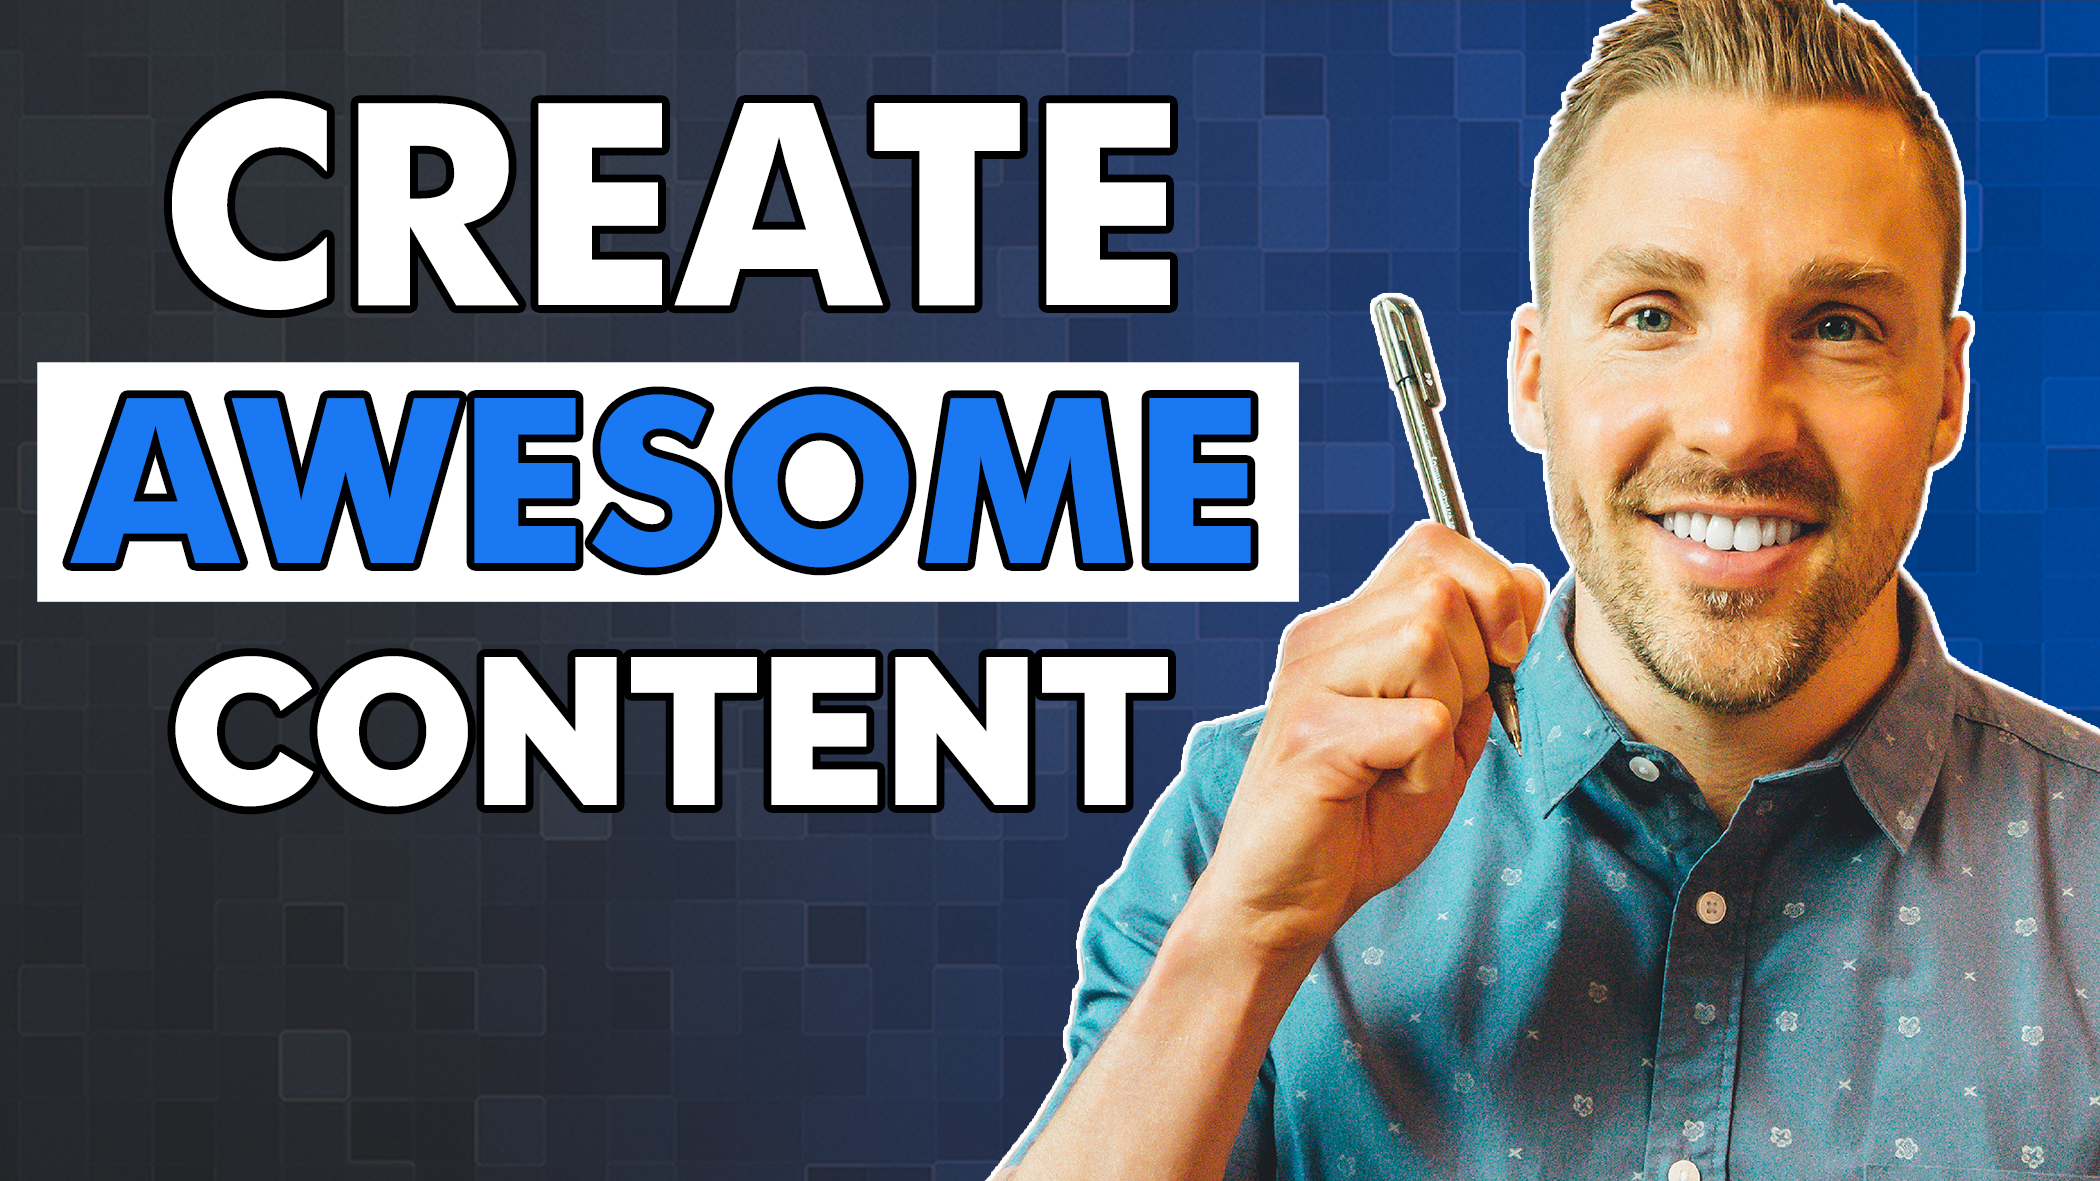 How To Write Great Content – Content Marketing For Your Blog, Website, Or Ads (2019)